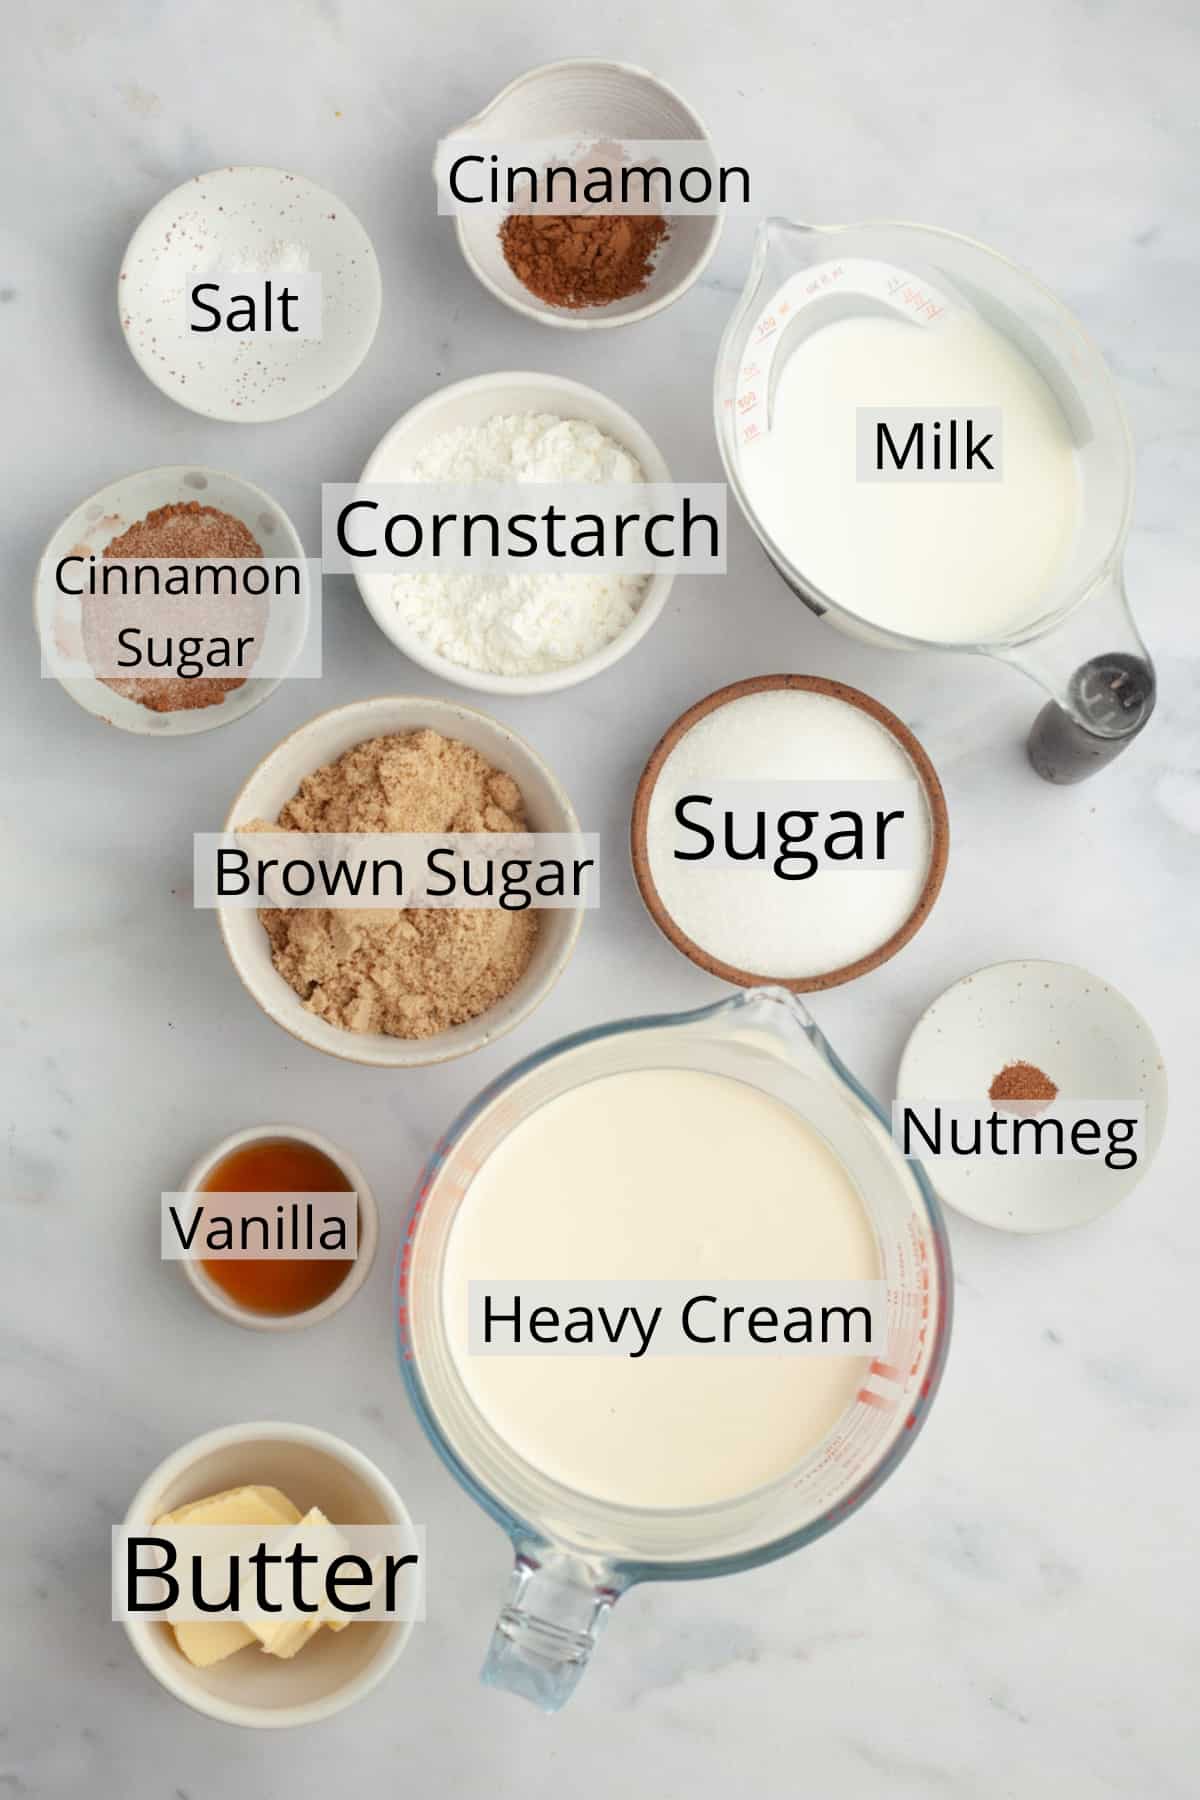 All the ingredients needed to make cinnamon pie, weighed out into small bowls.